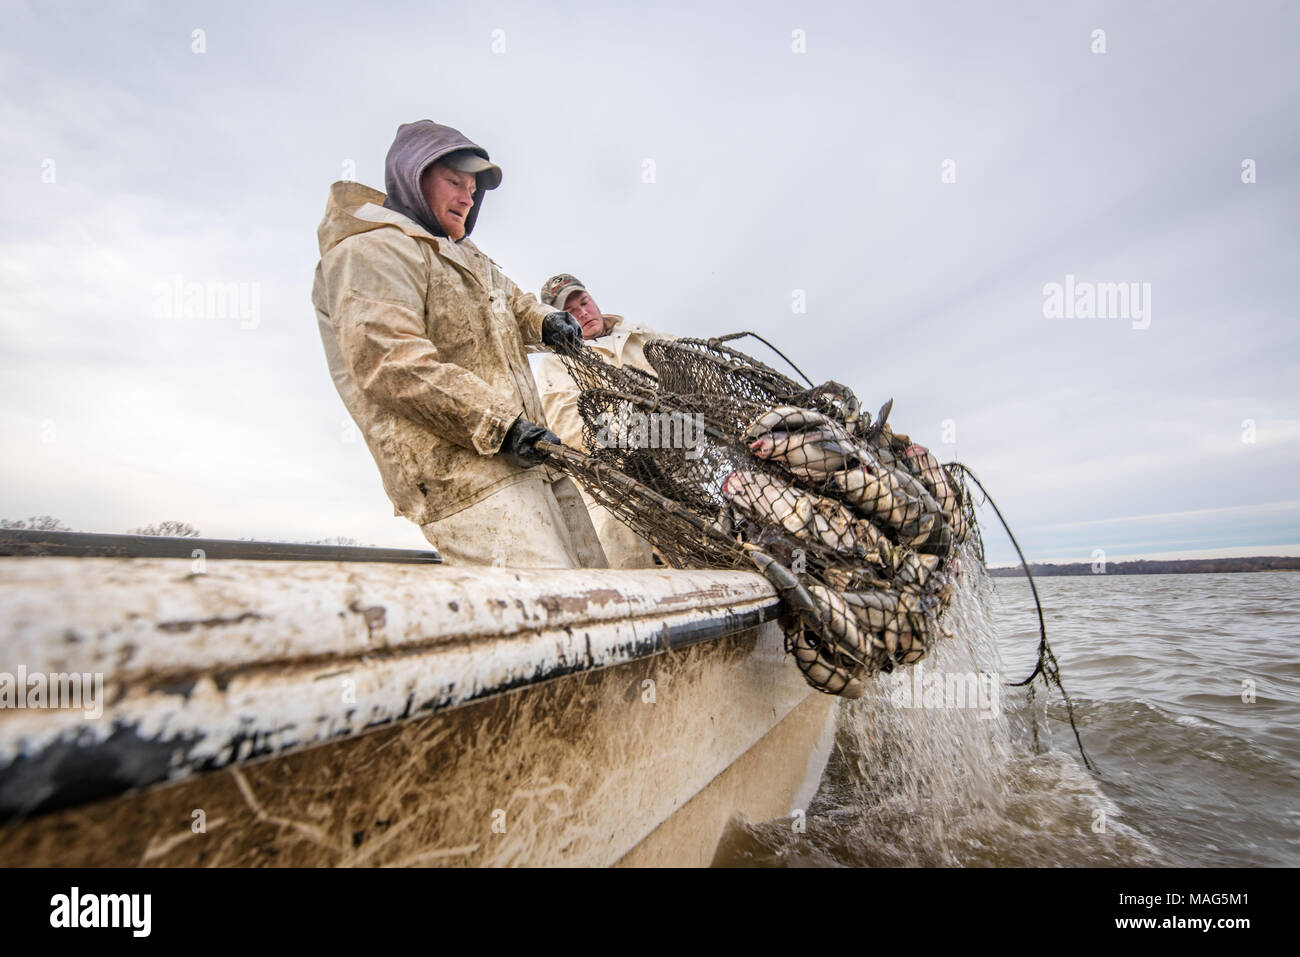 Fishermen pulling in a hoop net of blue catfish on the Potomac